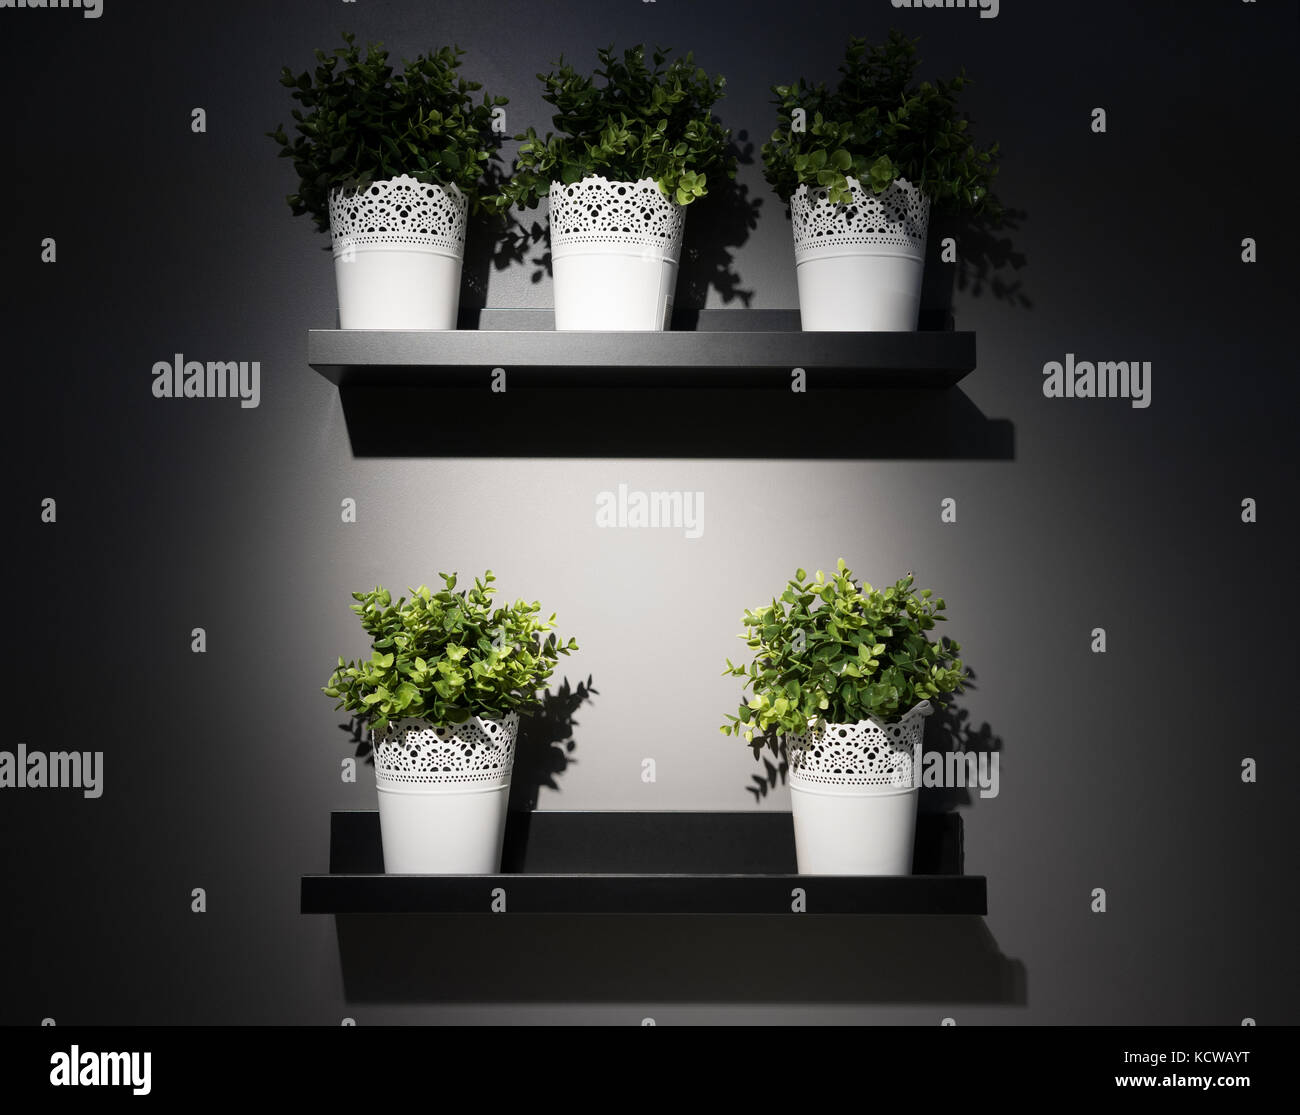 Many type of plant in the pots placed on the shelf Stock Photo